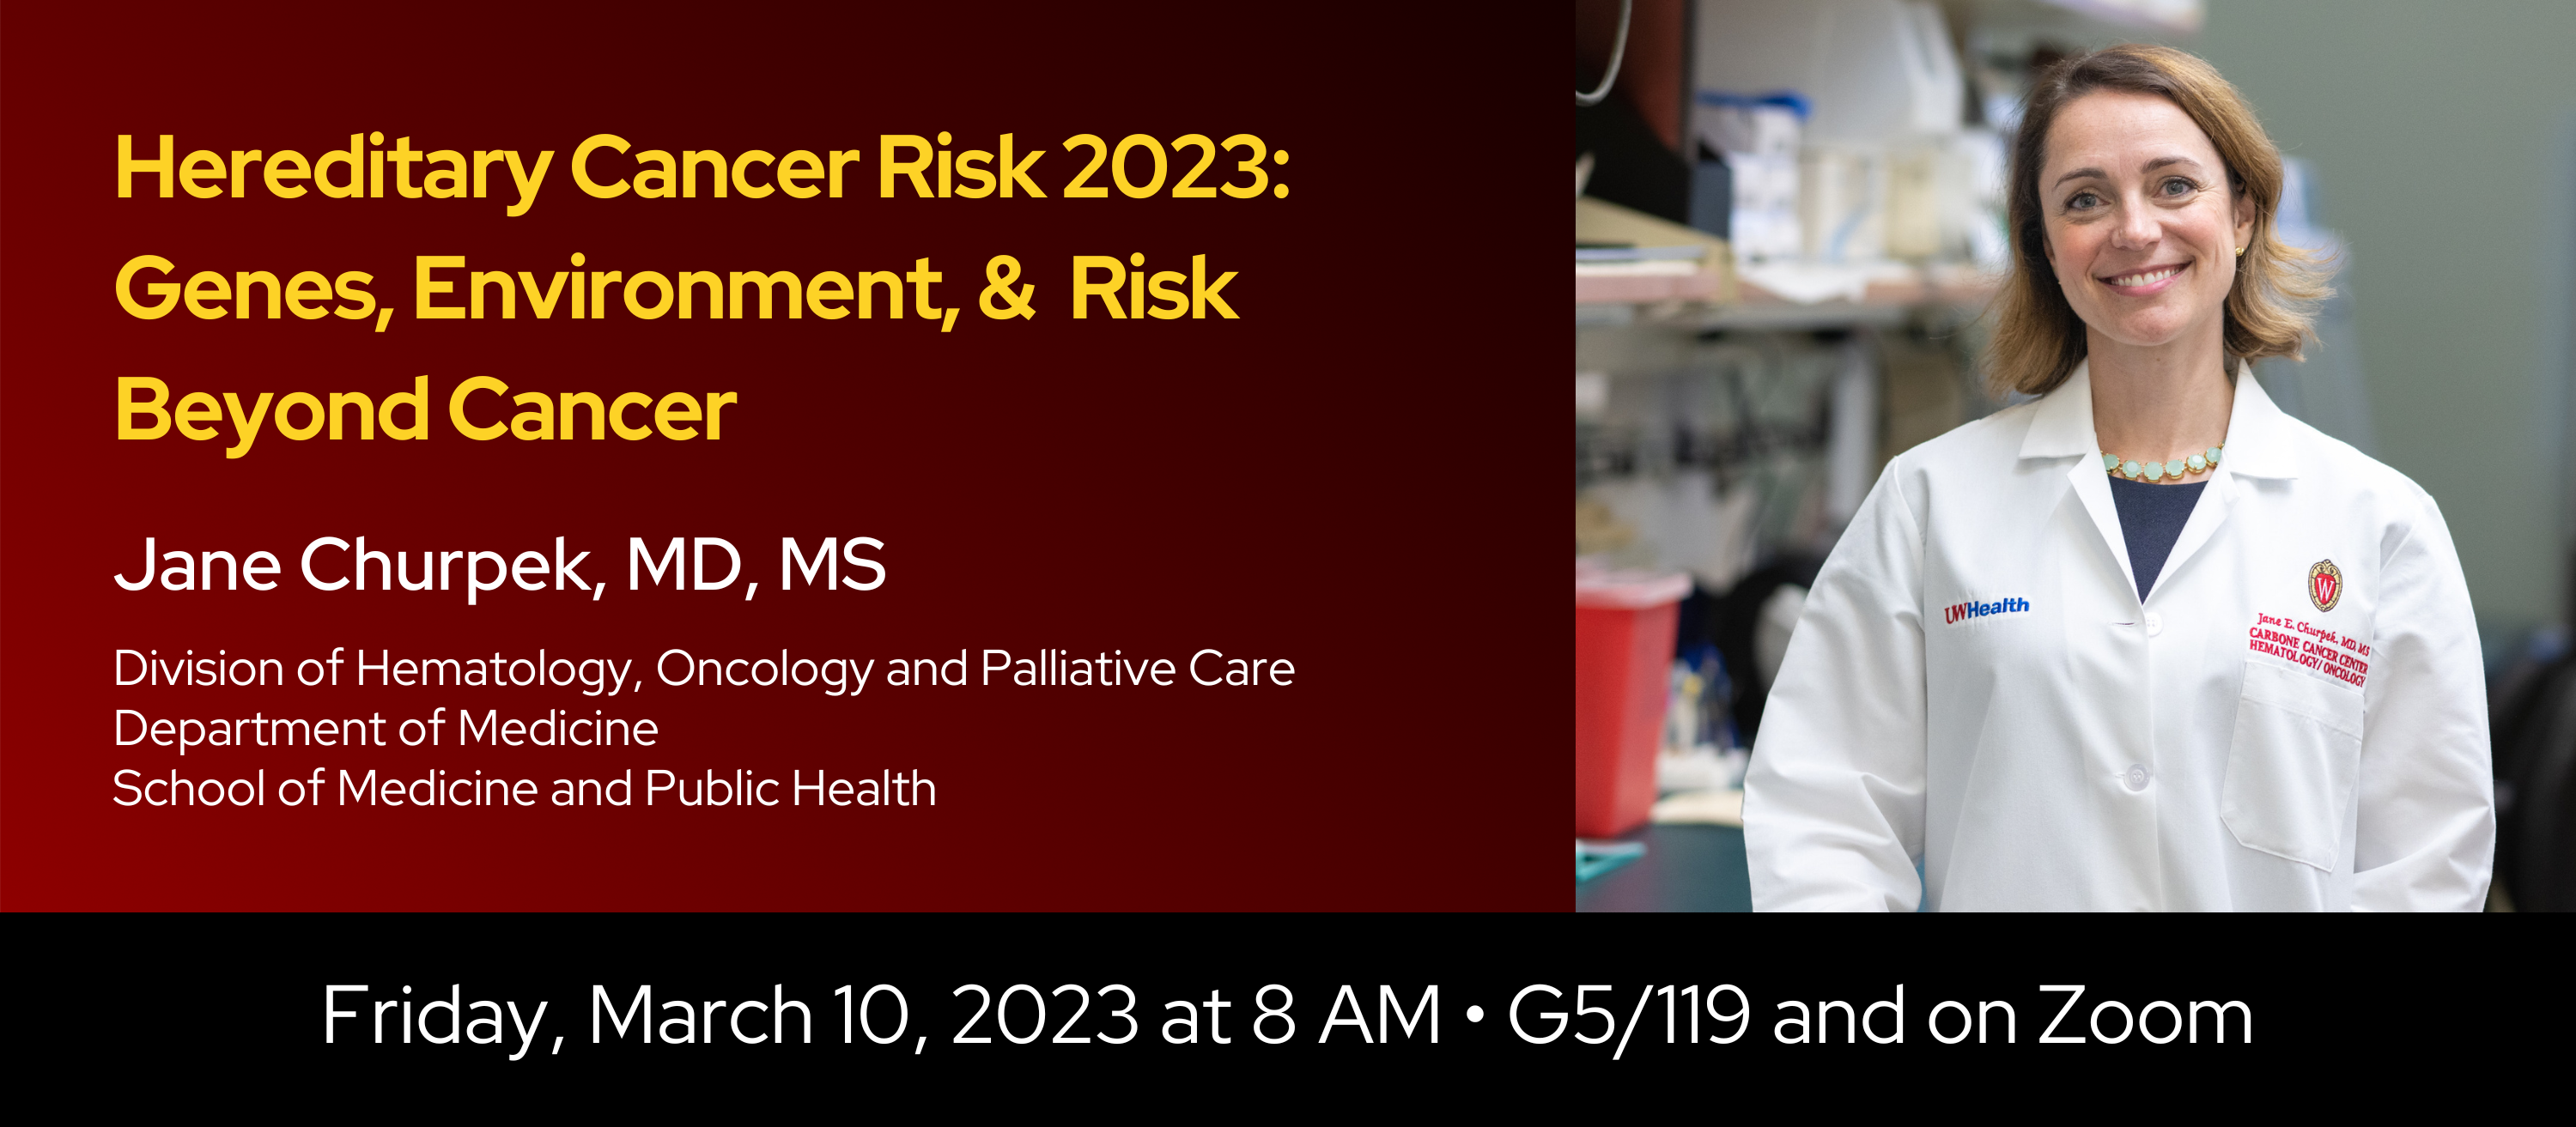 Title: Hereditary Cancer Risk 2023: Genes, Environment, & Risk Beyond Cancer